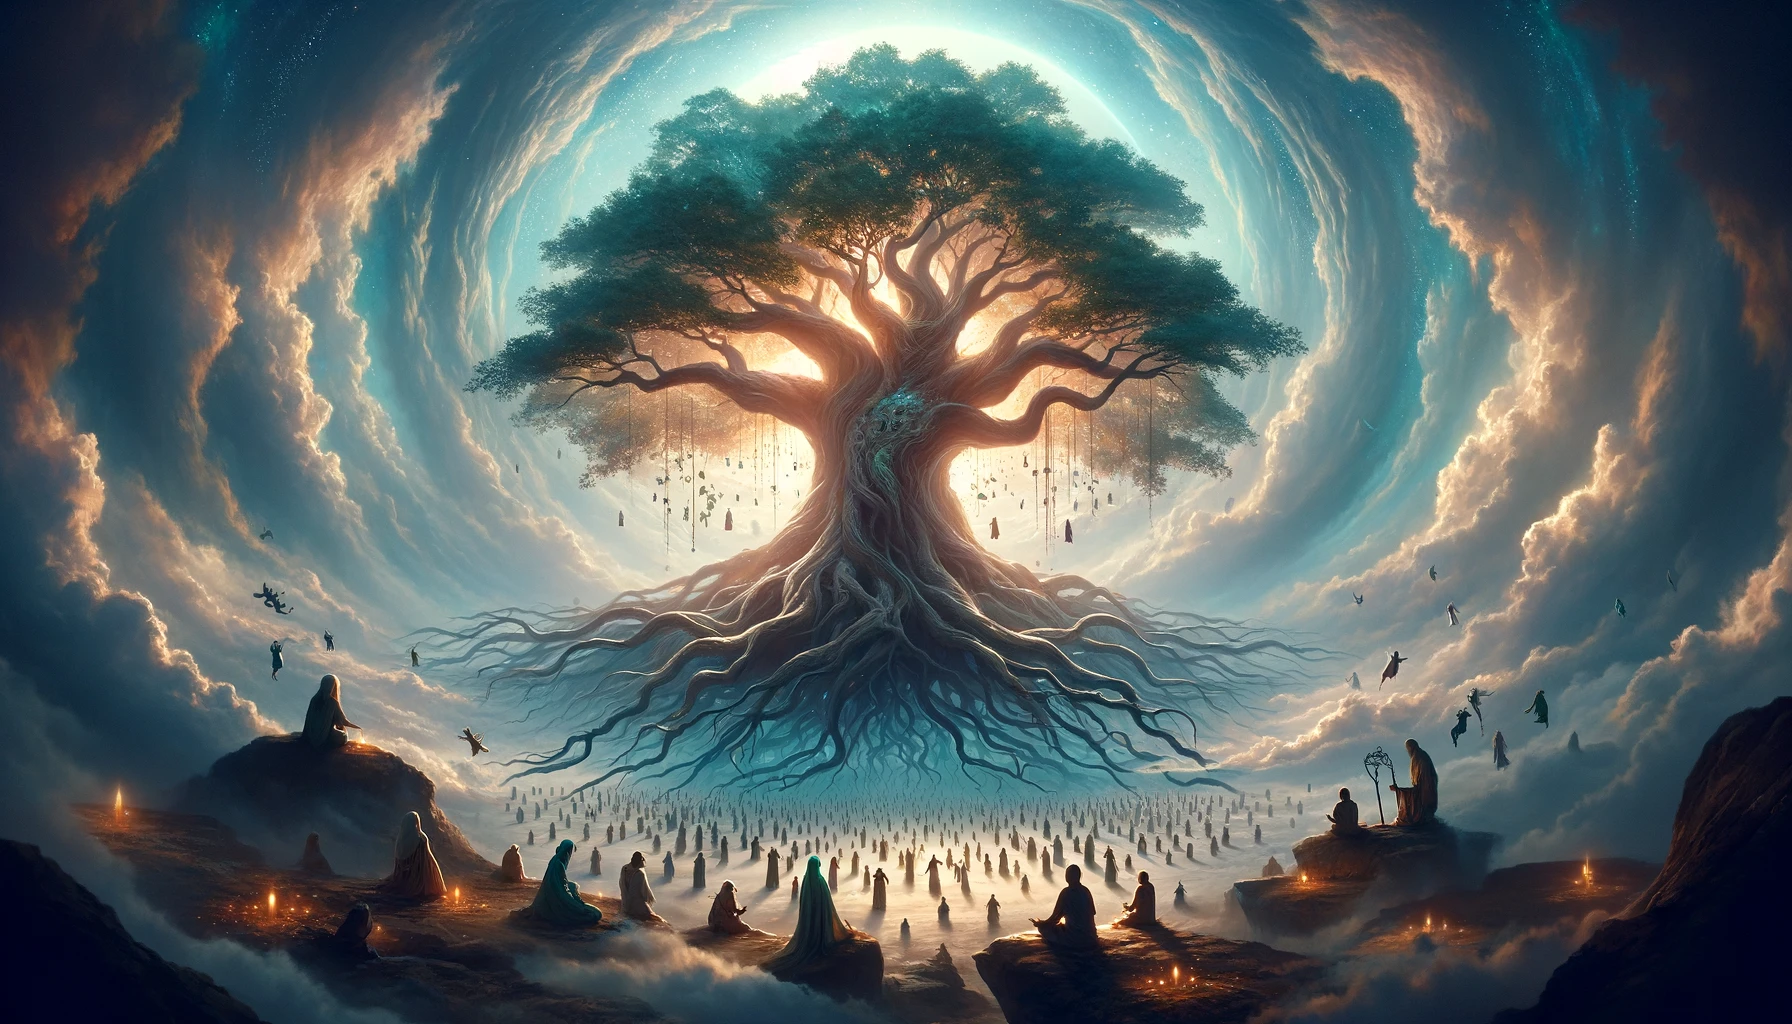 A 16_9 widescreen image that visualizes the concept of 'Higher Power'. The scene unfolds in a breathtaking, ethereal landscape that seems to transcend